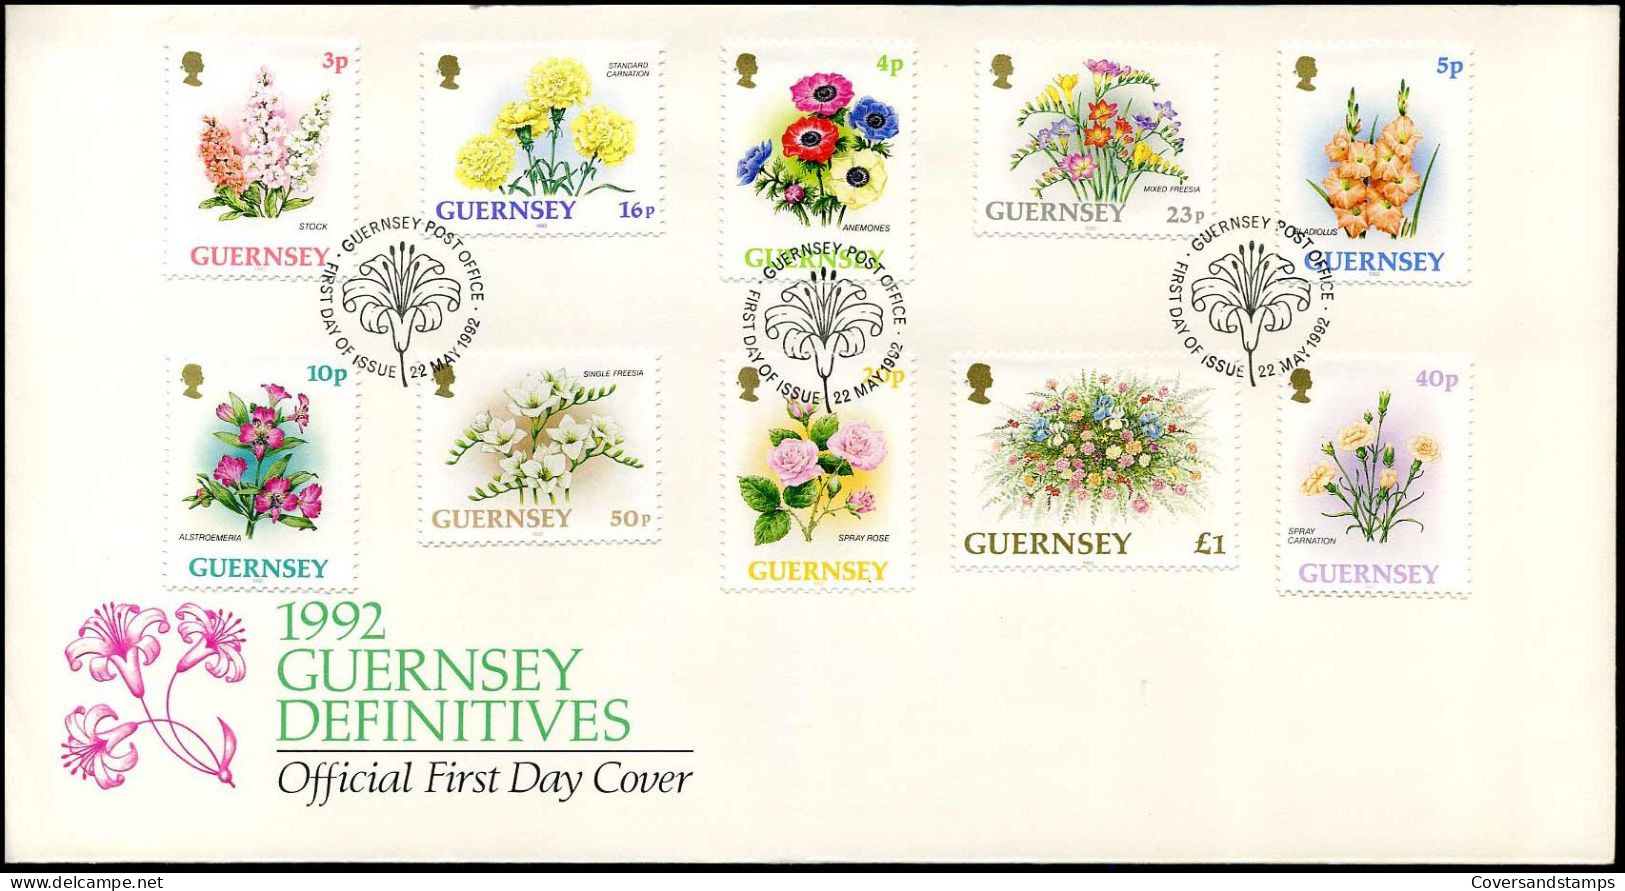 FDC - Guernsey Definitives 1992 - Guernesey